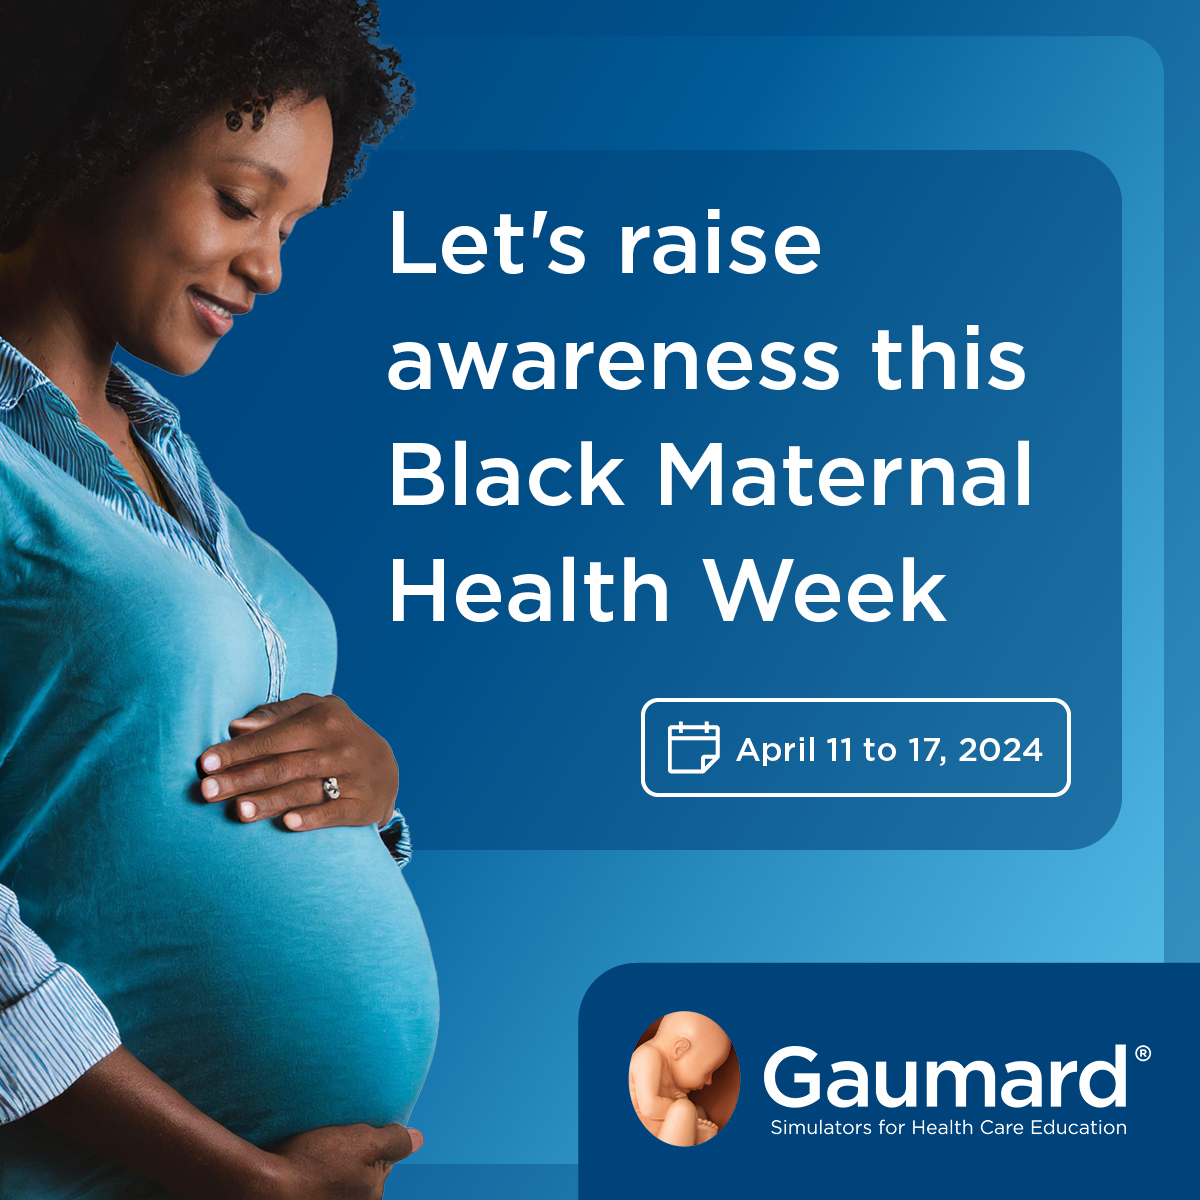 It's #BlackMaternalHealthWeek! Let's raise awareness of maternal health disparities and advocate for improved care for Black mothers. Simulation-based training with VICTORIA and Super TORY helps develop and hone crucial skills, boosting readiness and patient safety.